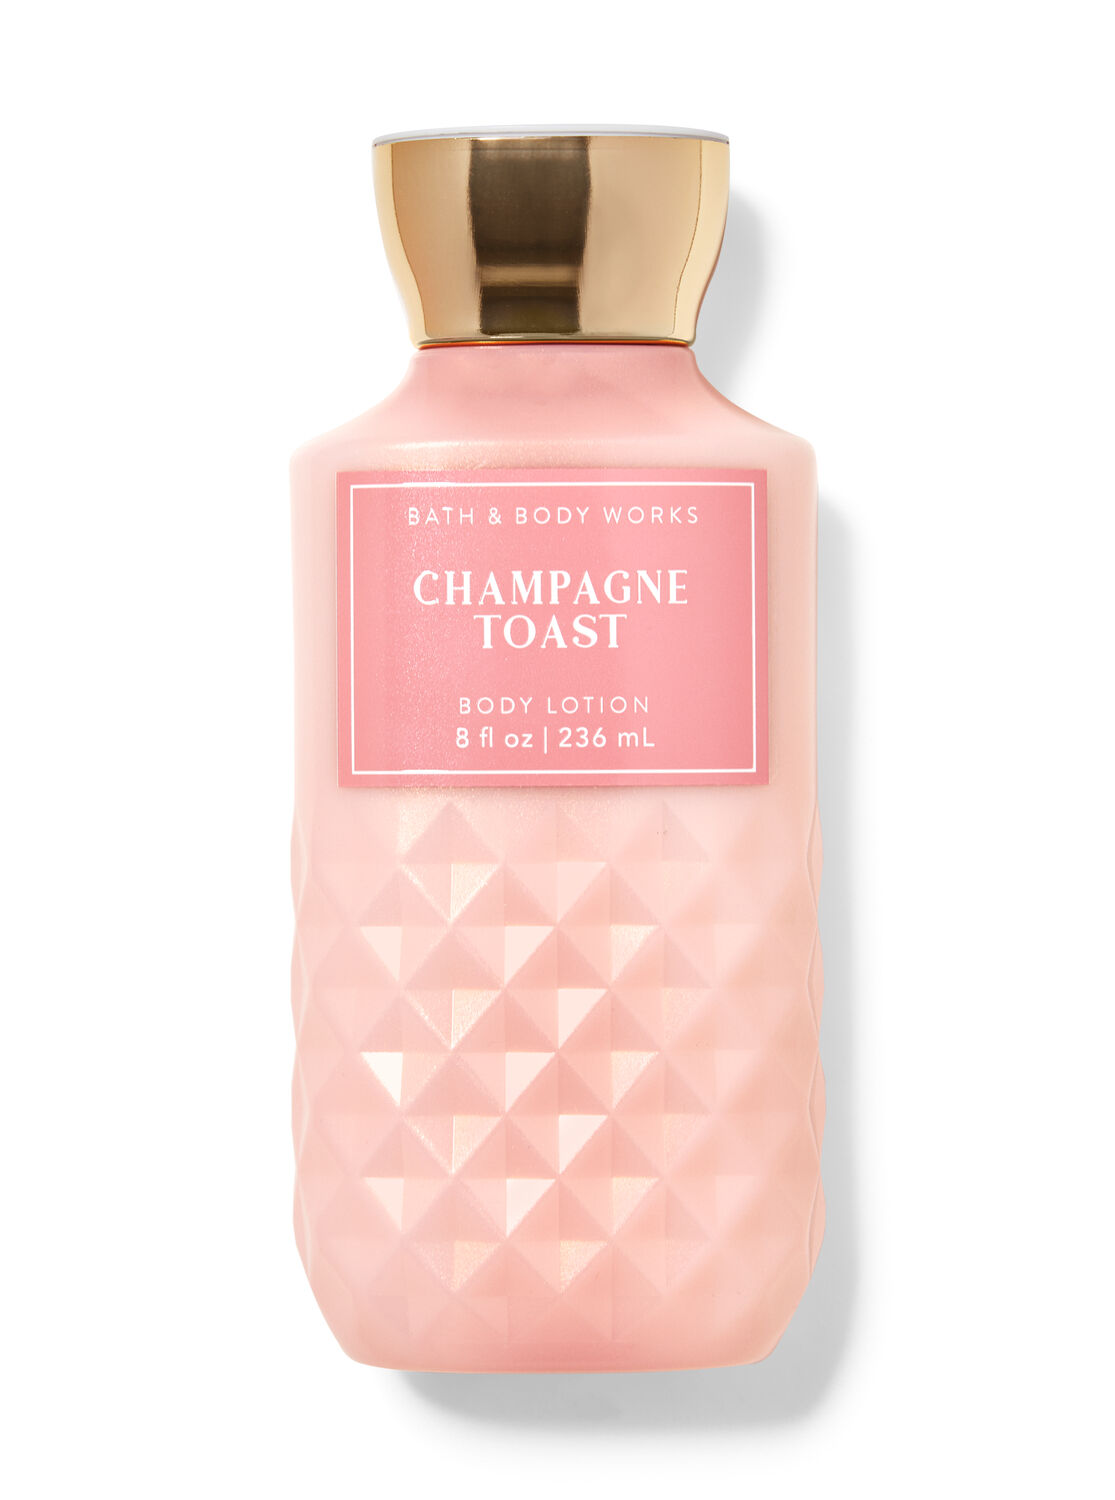 Champagne toast bath and body works